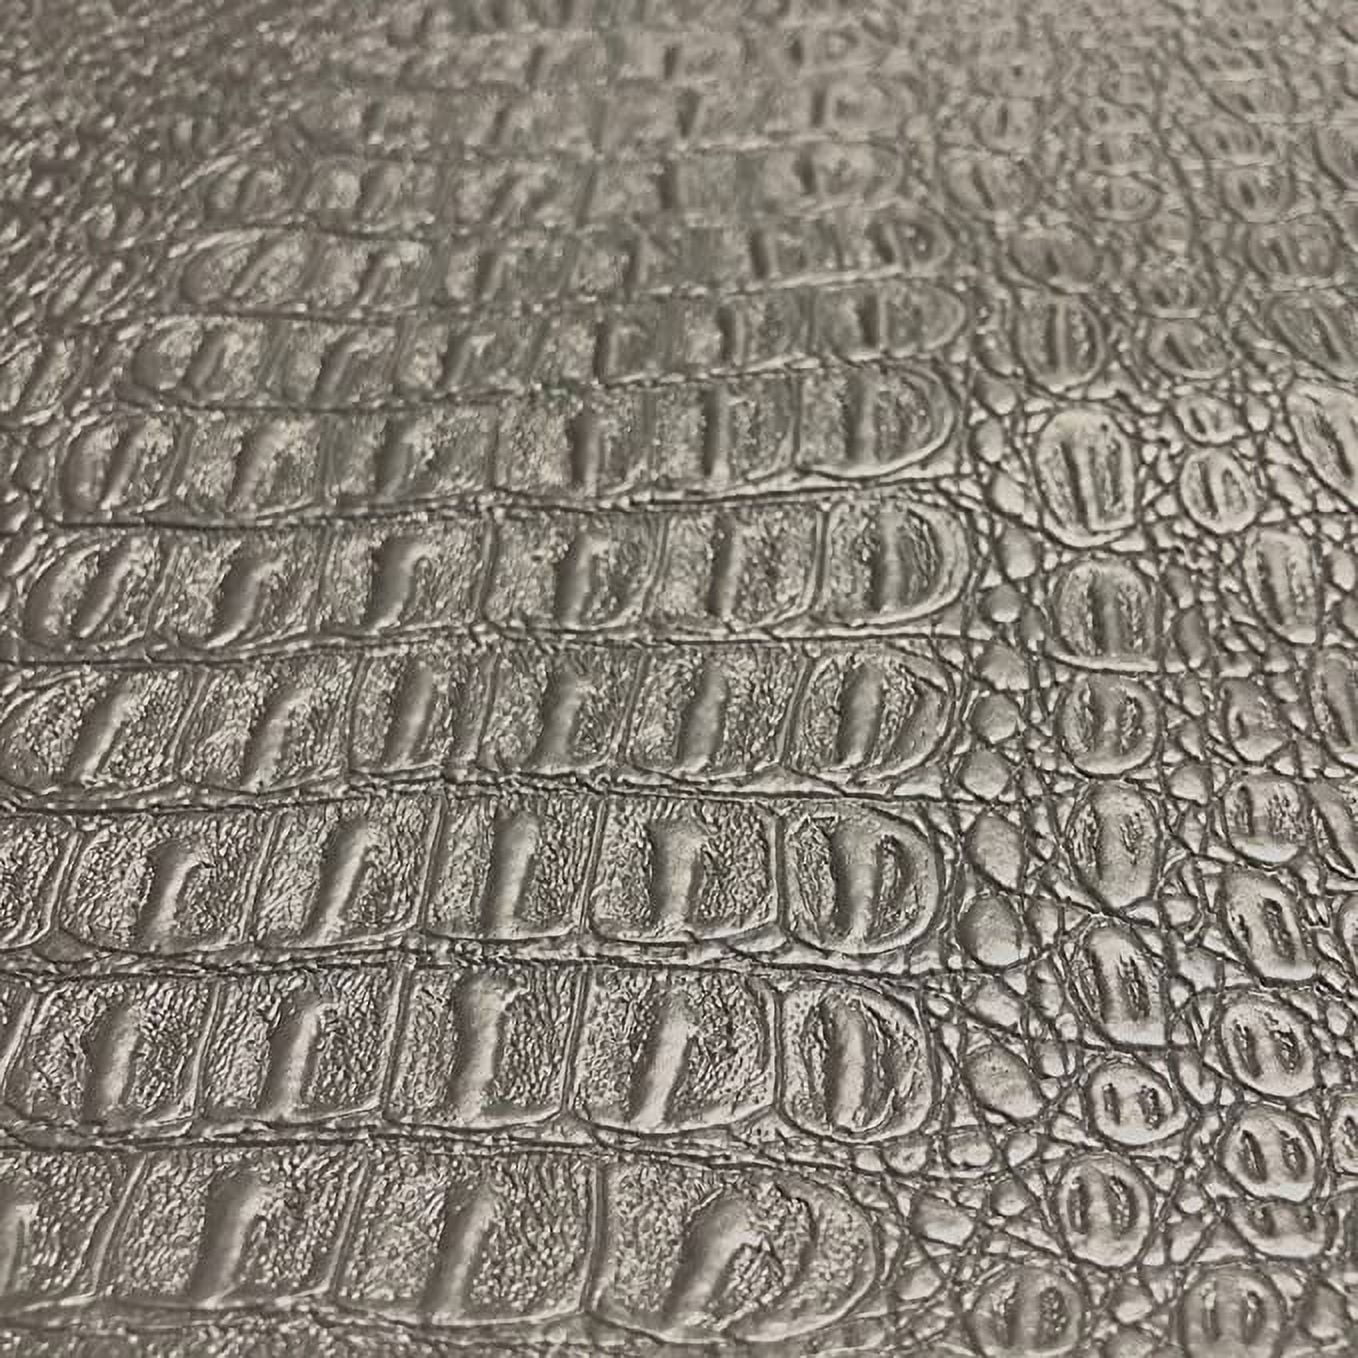 Faux Crocodile Vinyl Leather Upholstery Fabric By The Yard